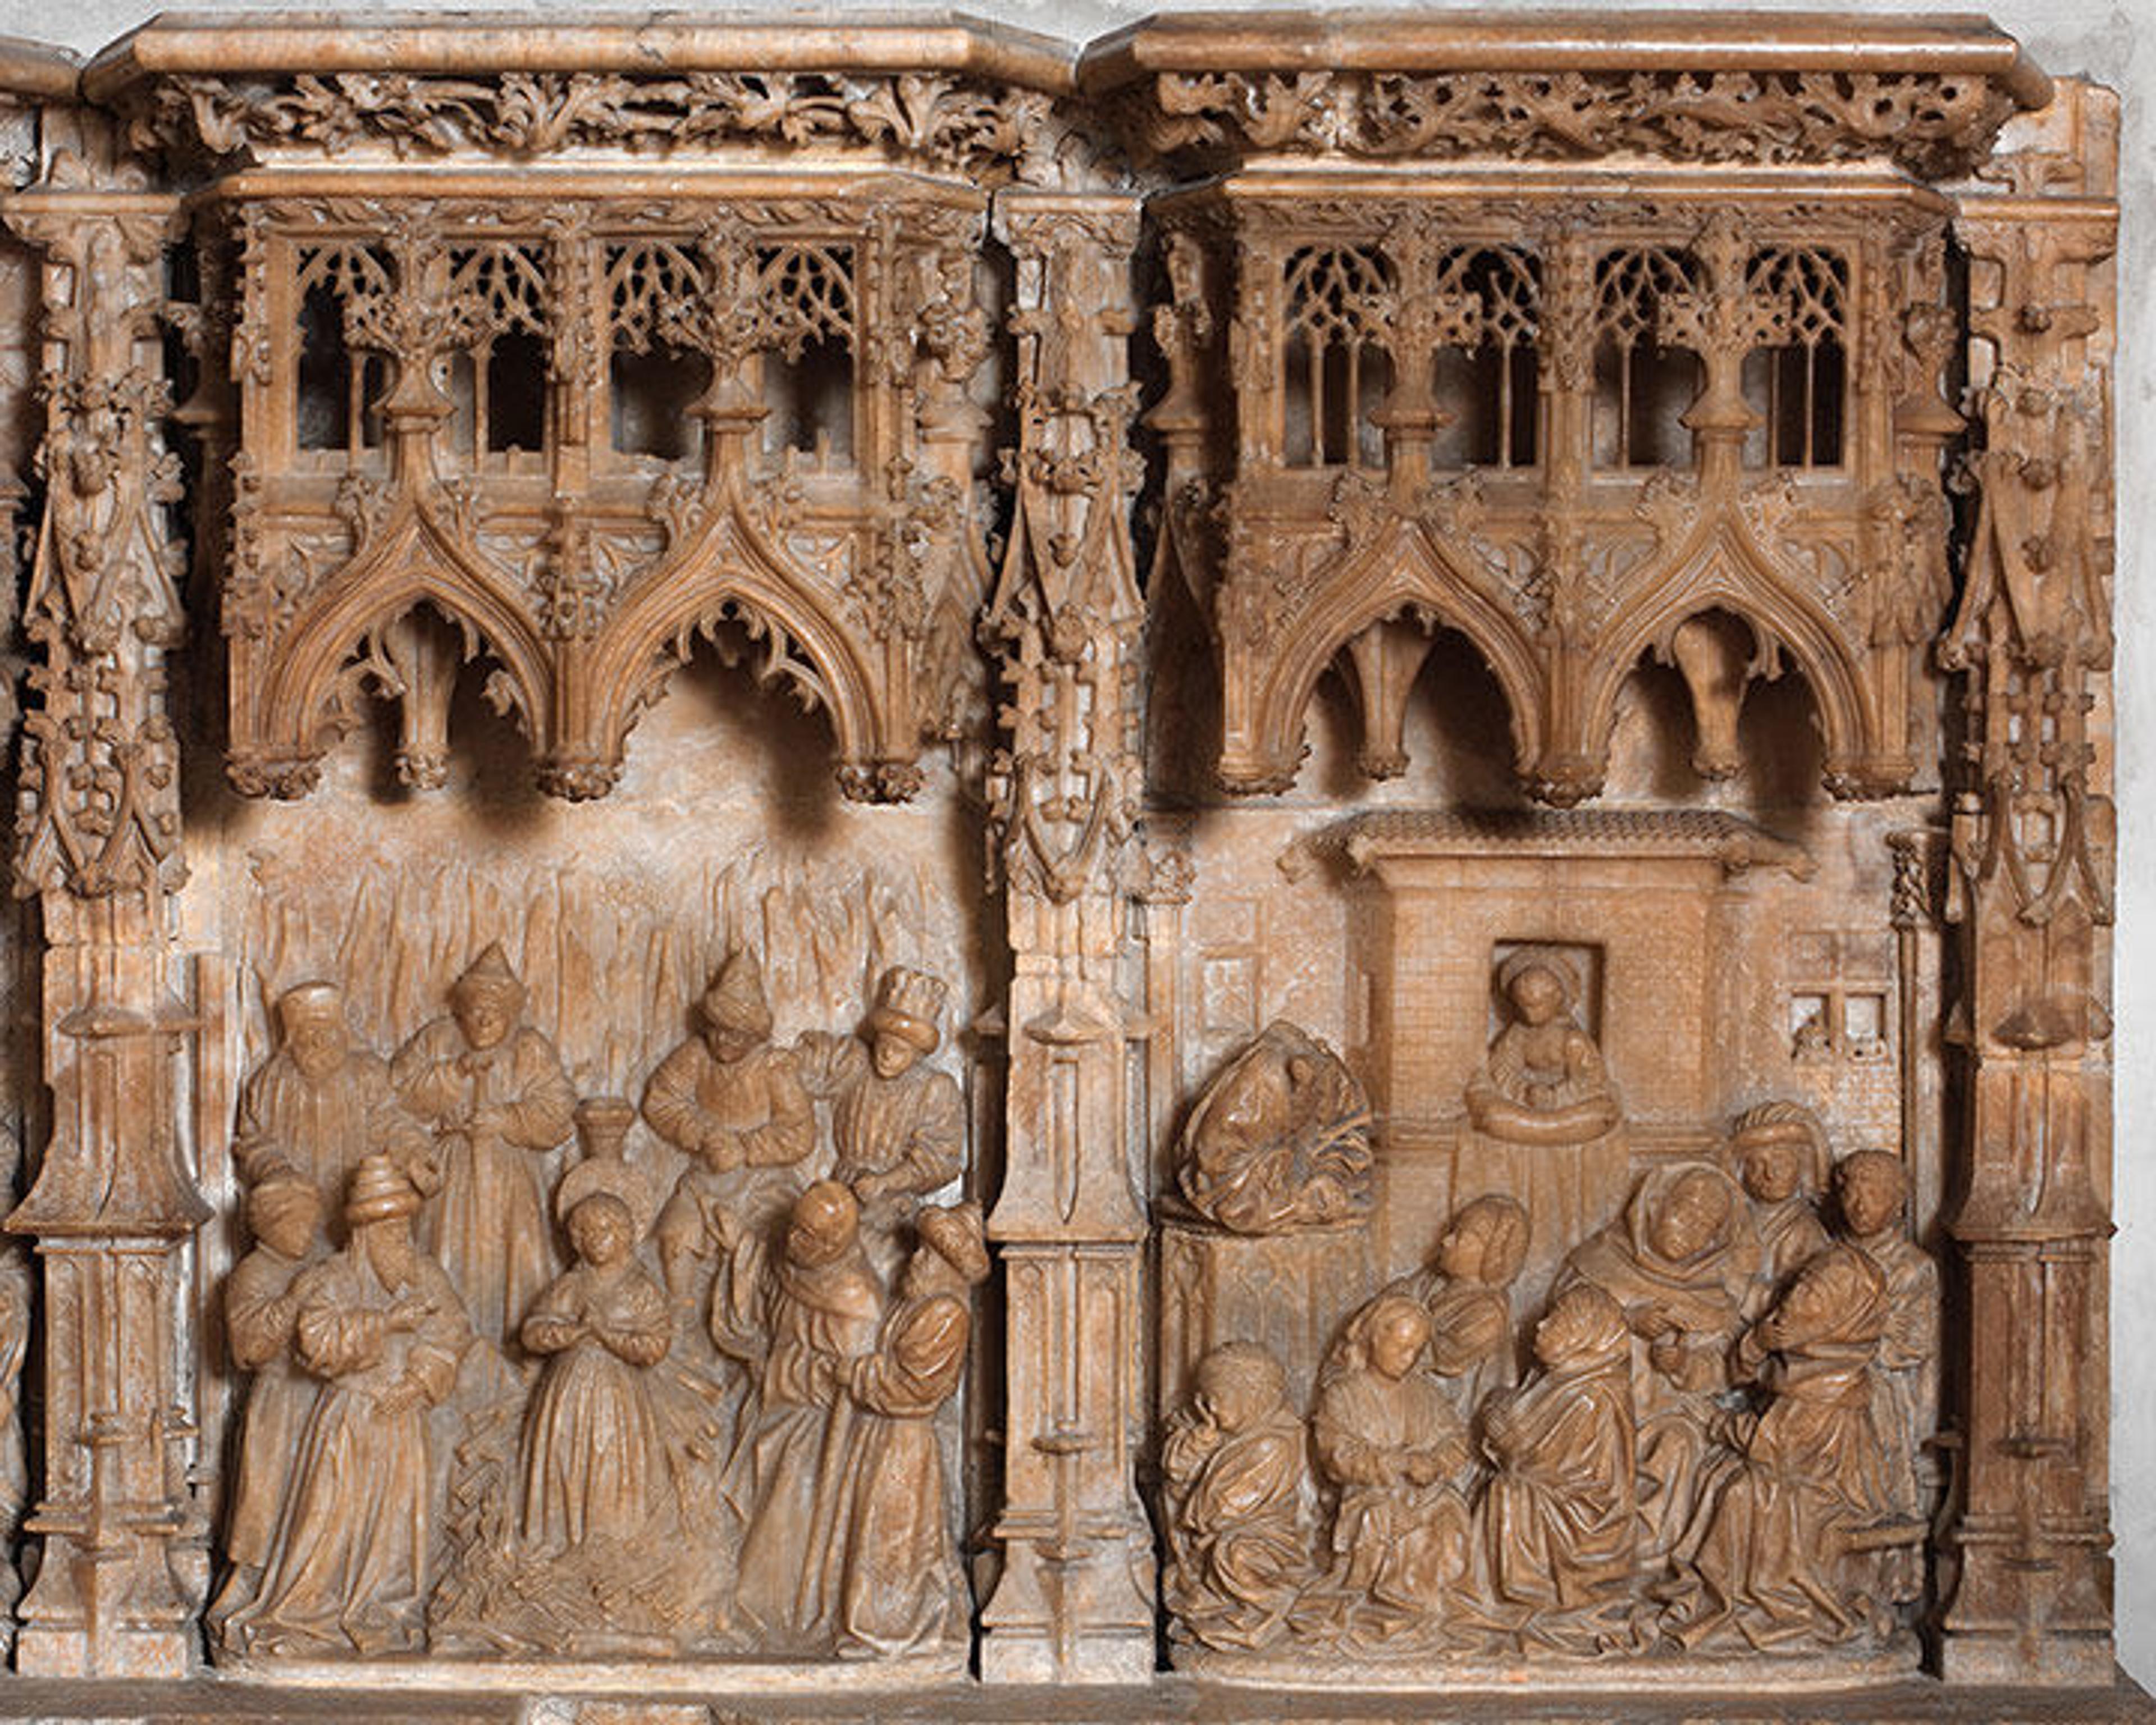 A detail of an alabaster alterpiece from the archbishop's chapel at Saragossa, depicting two scenes of Saint Thecla